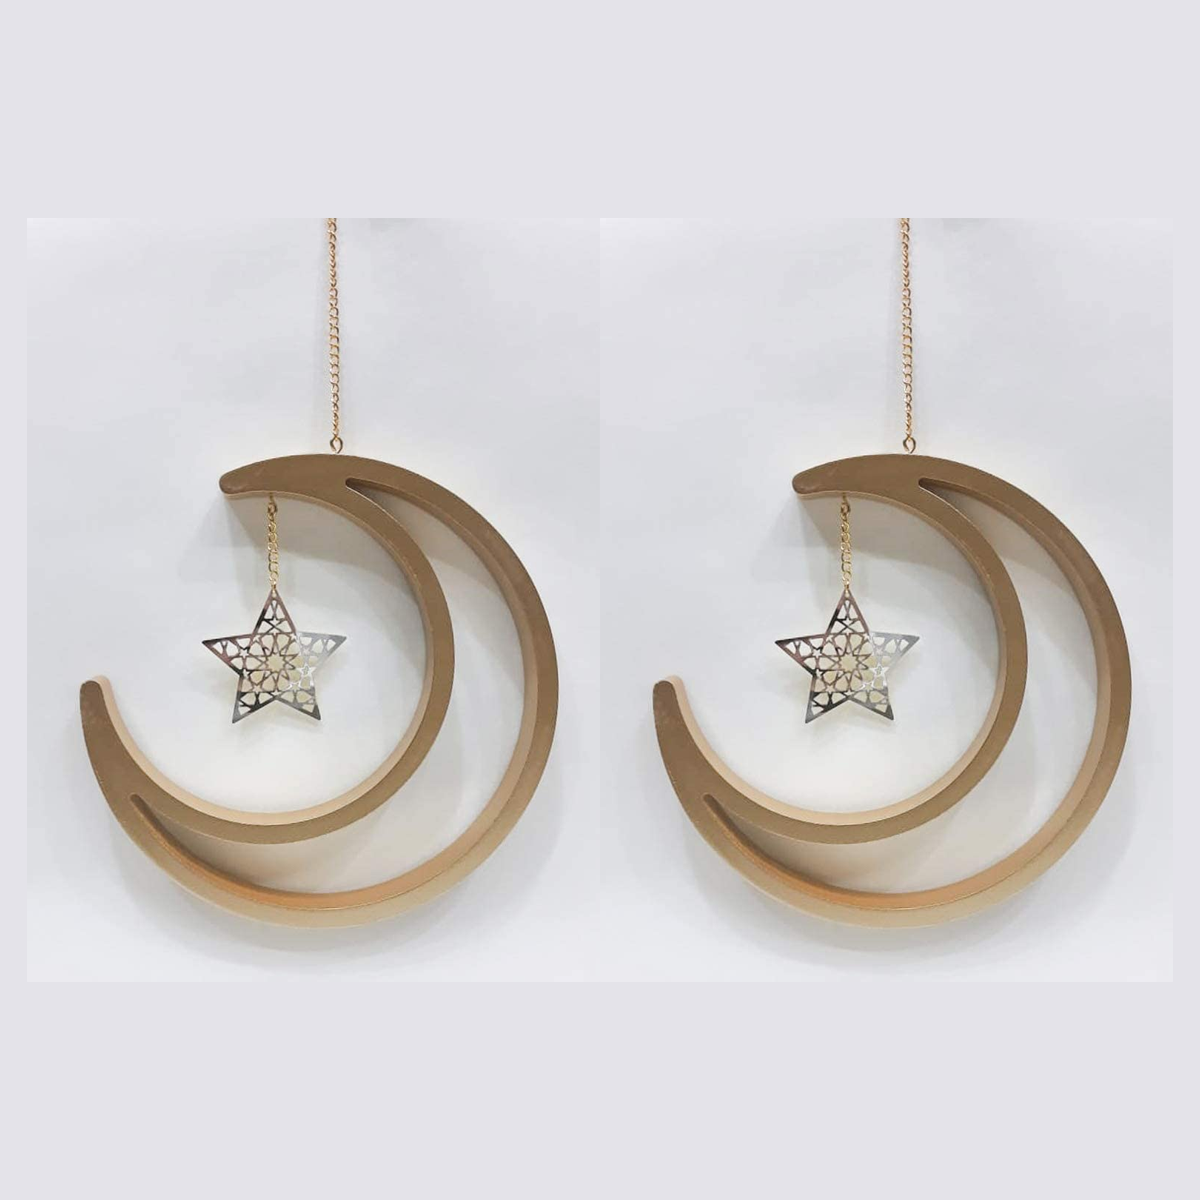 Set of 2 Gold Moon Shape Wall Hanging Decor for Month of Ramadan Gathering Home Decor Gift 19cm Diameter